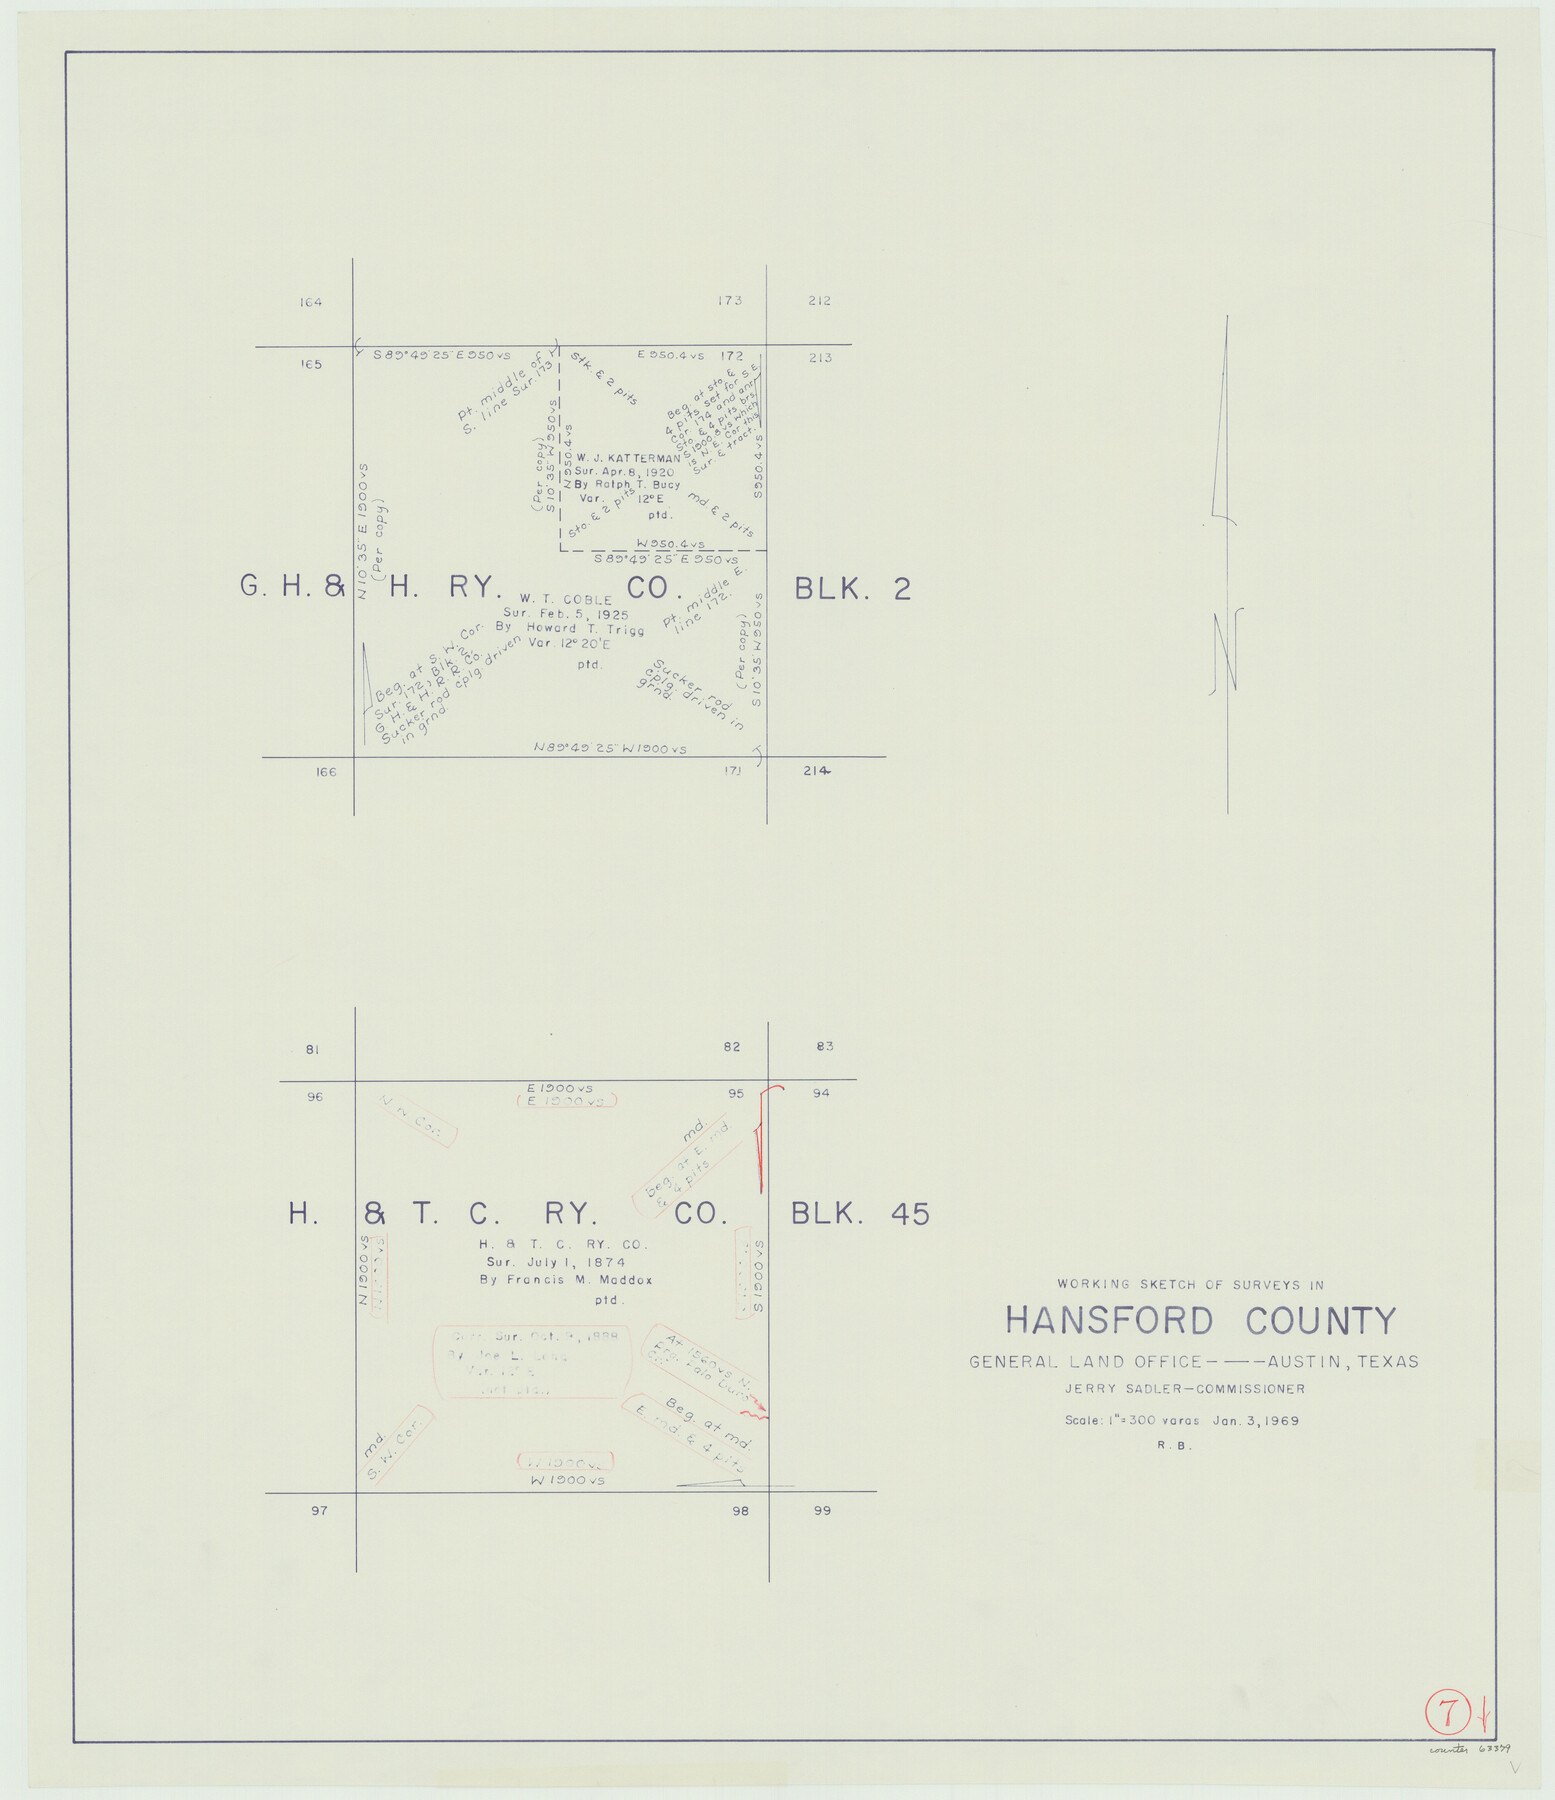 63379, Hansford County Working Sketch 7, General Map Collection